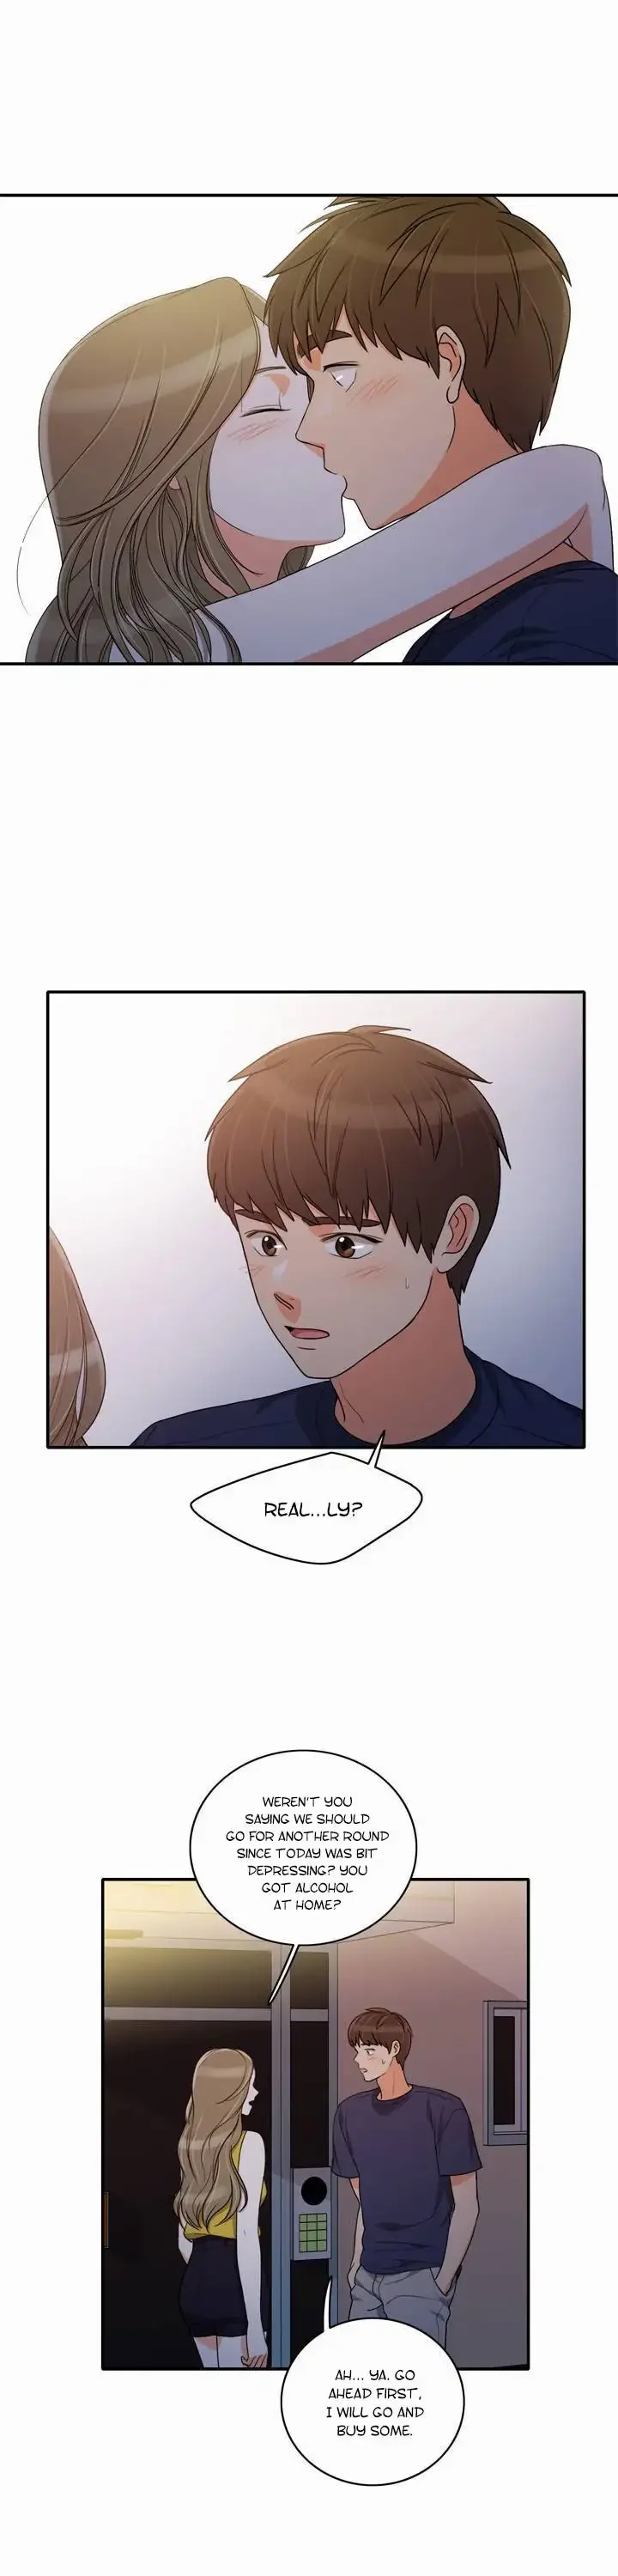 do-it-one-more-time-chap-36-1